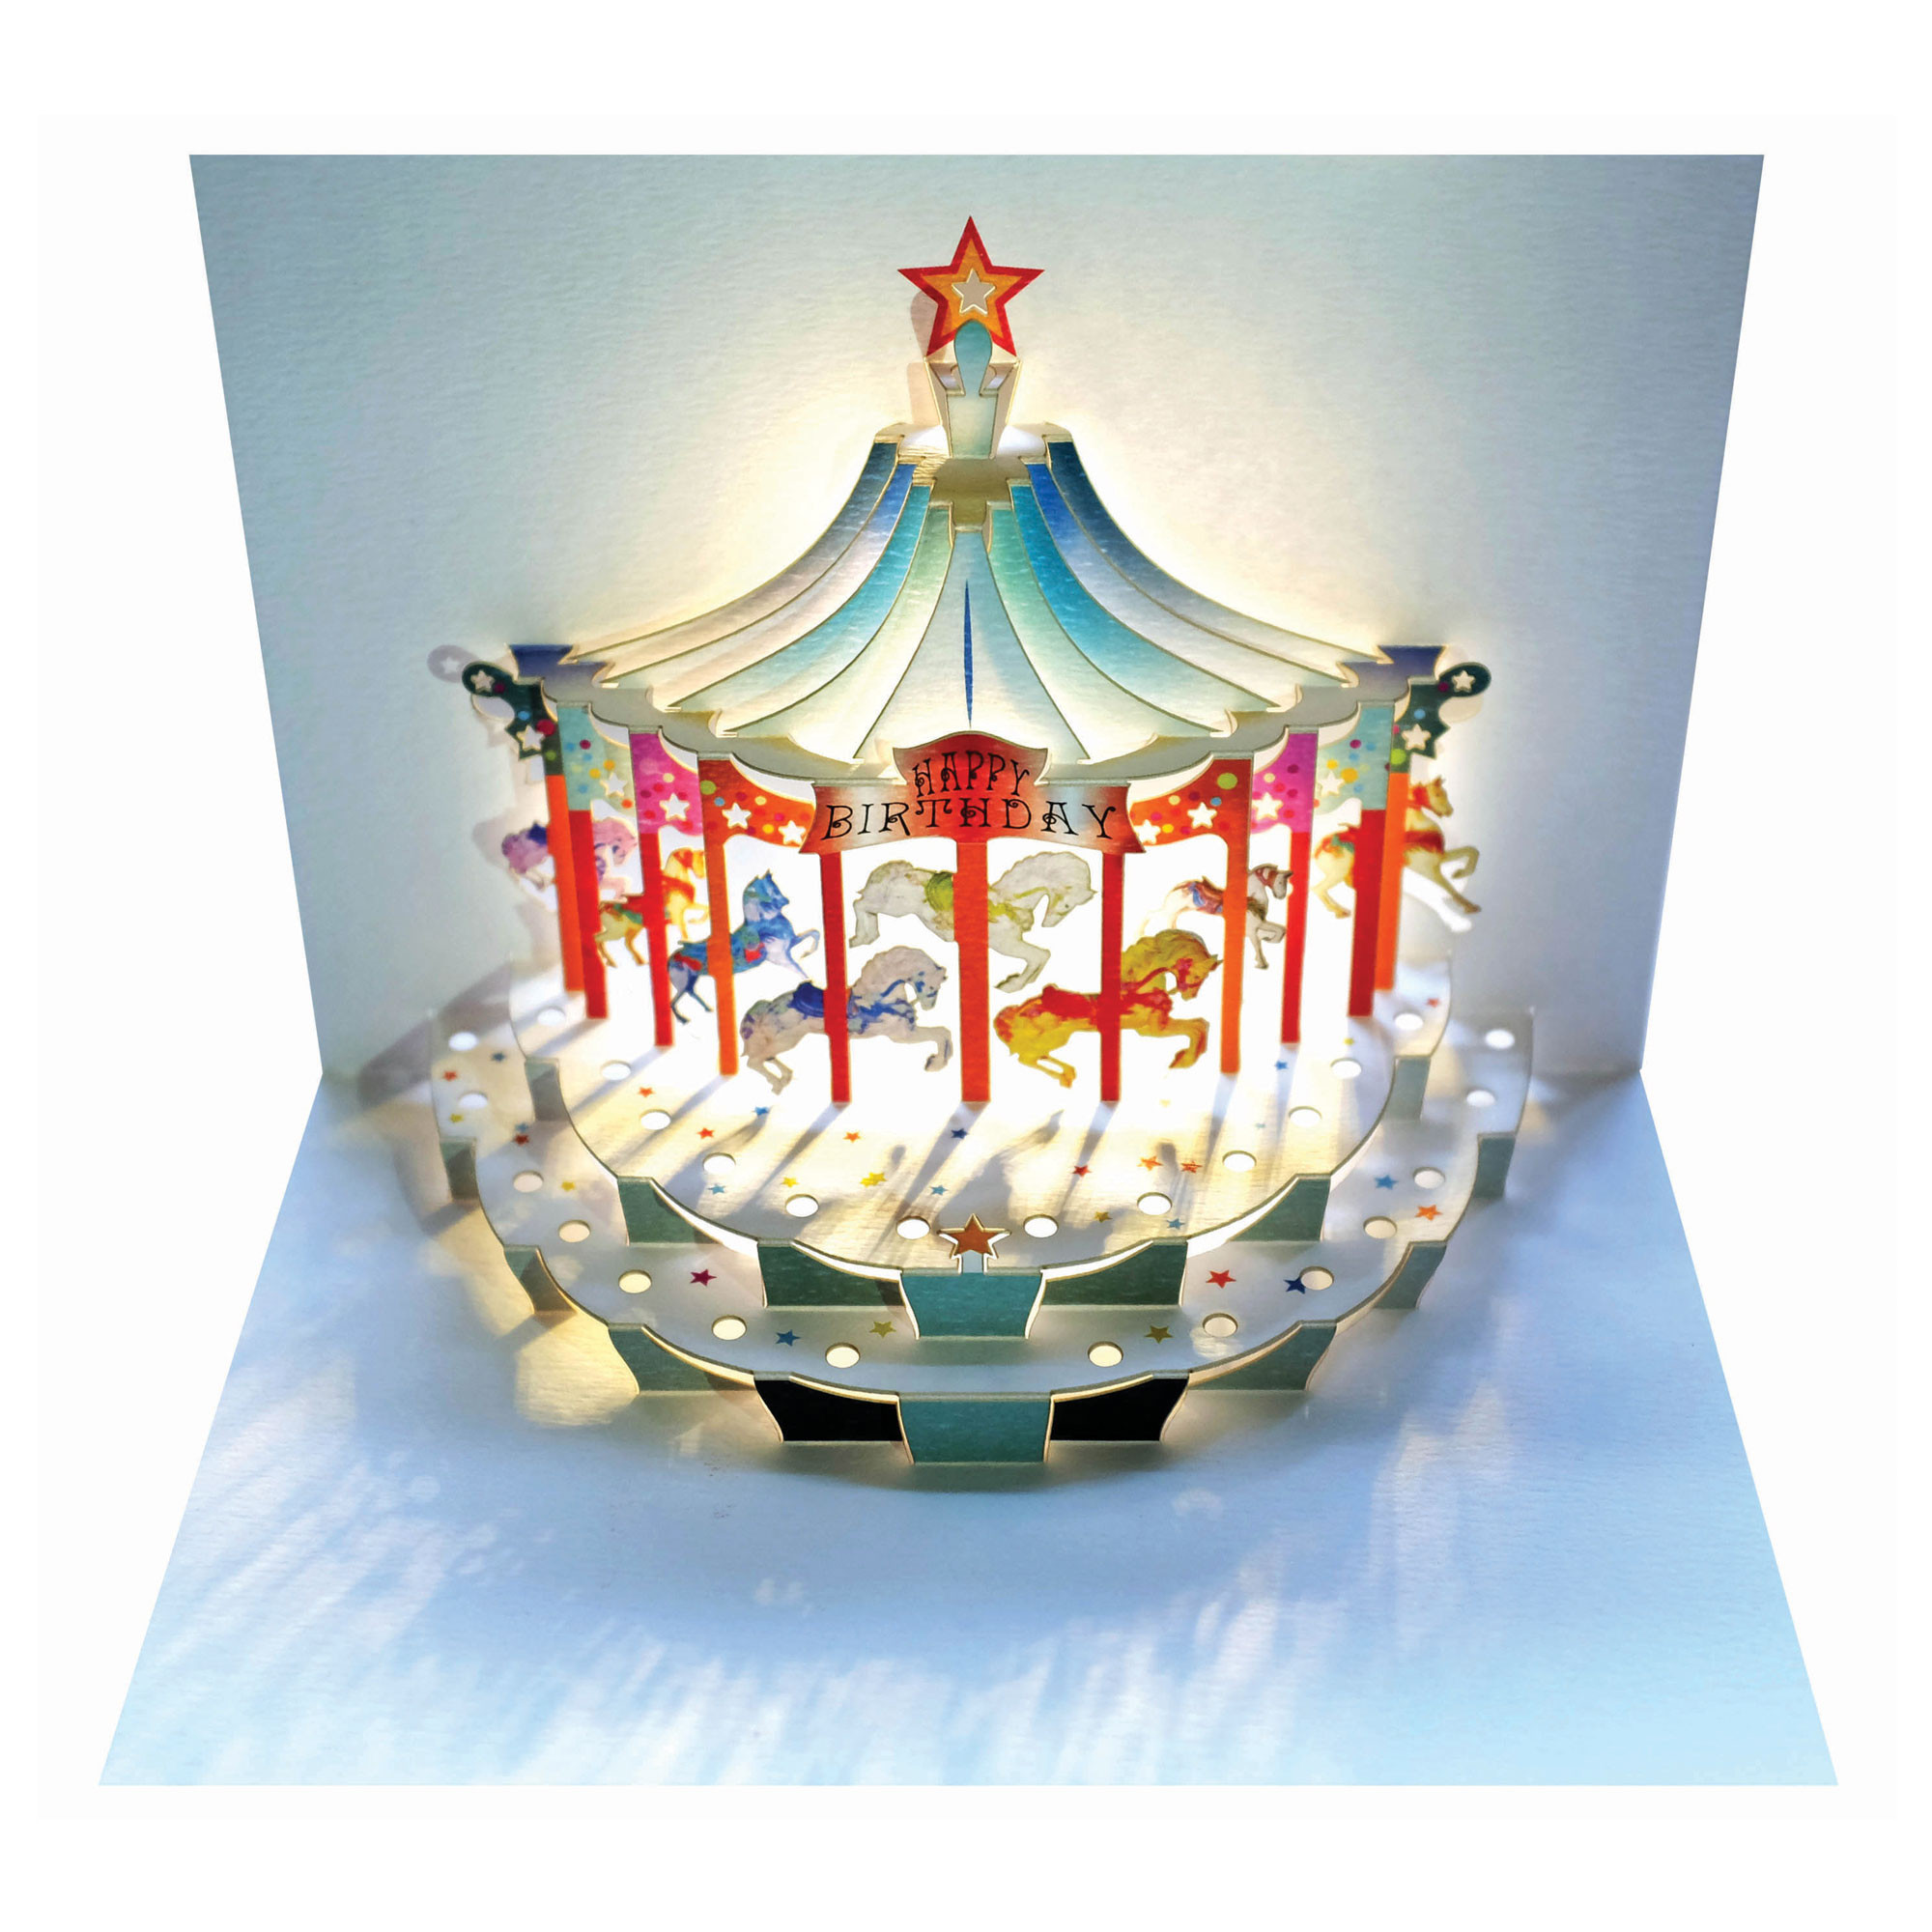 Pop Up Birthday Card
 GE Feng Forever Happy Birthday Carousel Amazing Pop up